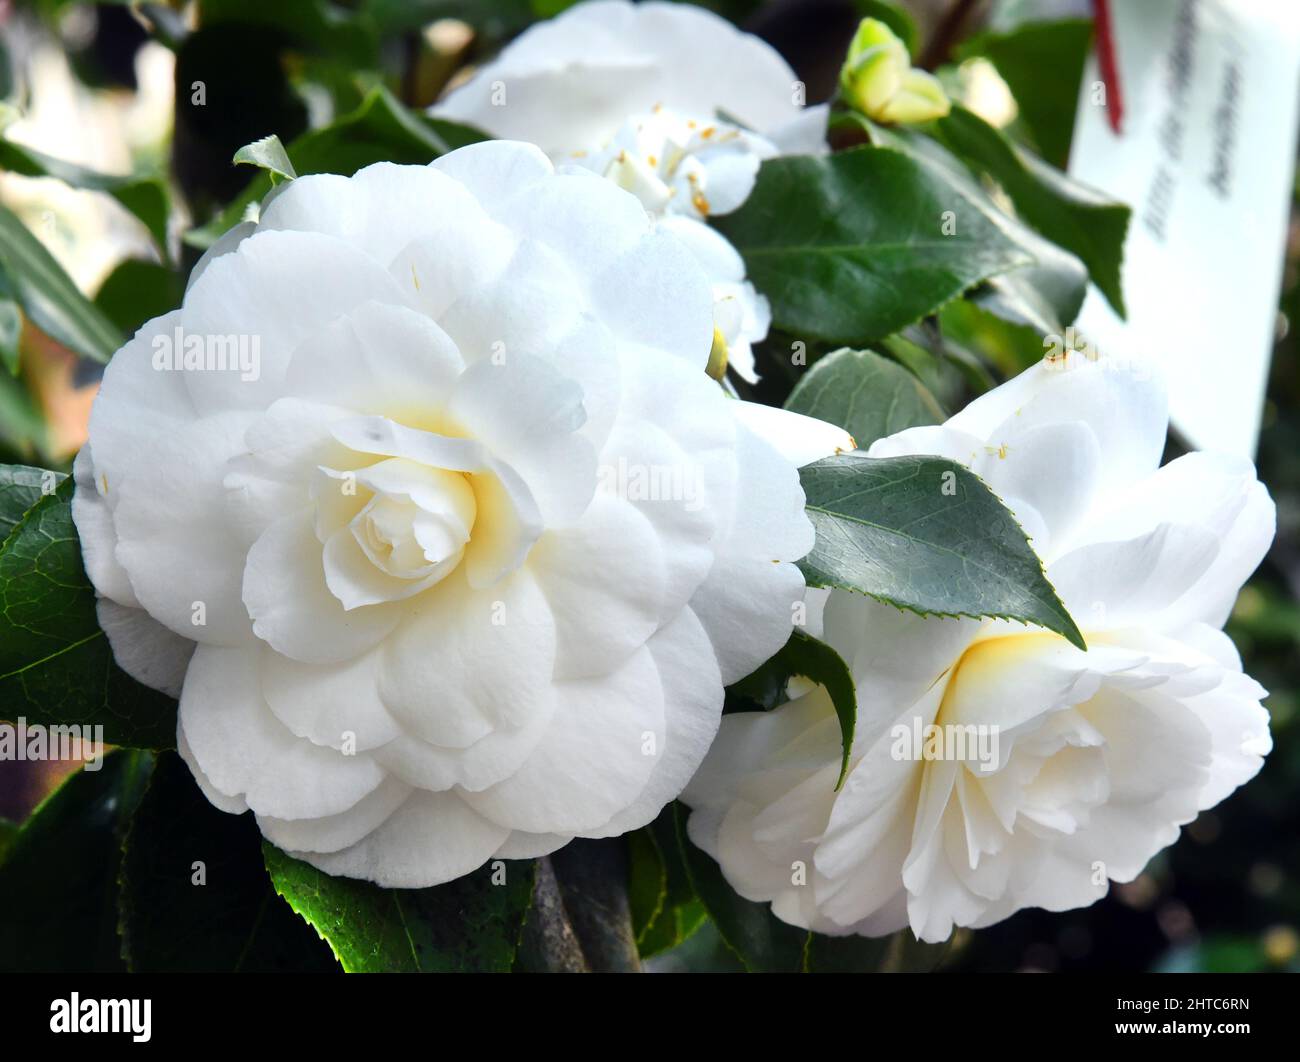 27 February 2022, Saxony, Roßwein: In the camellia house, which is looked after by members of the Heimatverein Roßwein e.V., the white flower splendor of the over 200-year-old camellia 'Alba plena' can currently be seen. The 6.50-meter-high plant, also known as the Tea Rose of Winter with its double flowers up to 10 centimeters in size, is said to have been planted in the 18th century by Count von Einsiedel at Gersdorf near Roßwein. The botanical rarity is the second oldest north of the Alps in Europe after the famous Pillnitz camellia and can be seen with other different camellia varieties ev Stock Photo